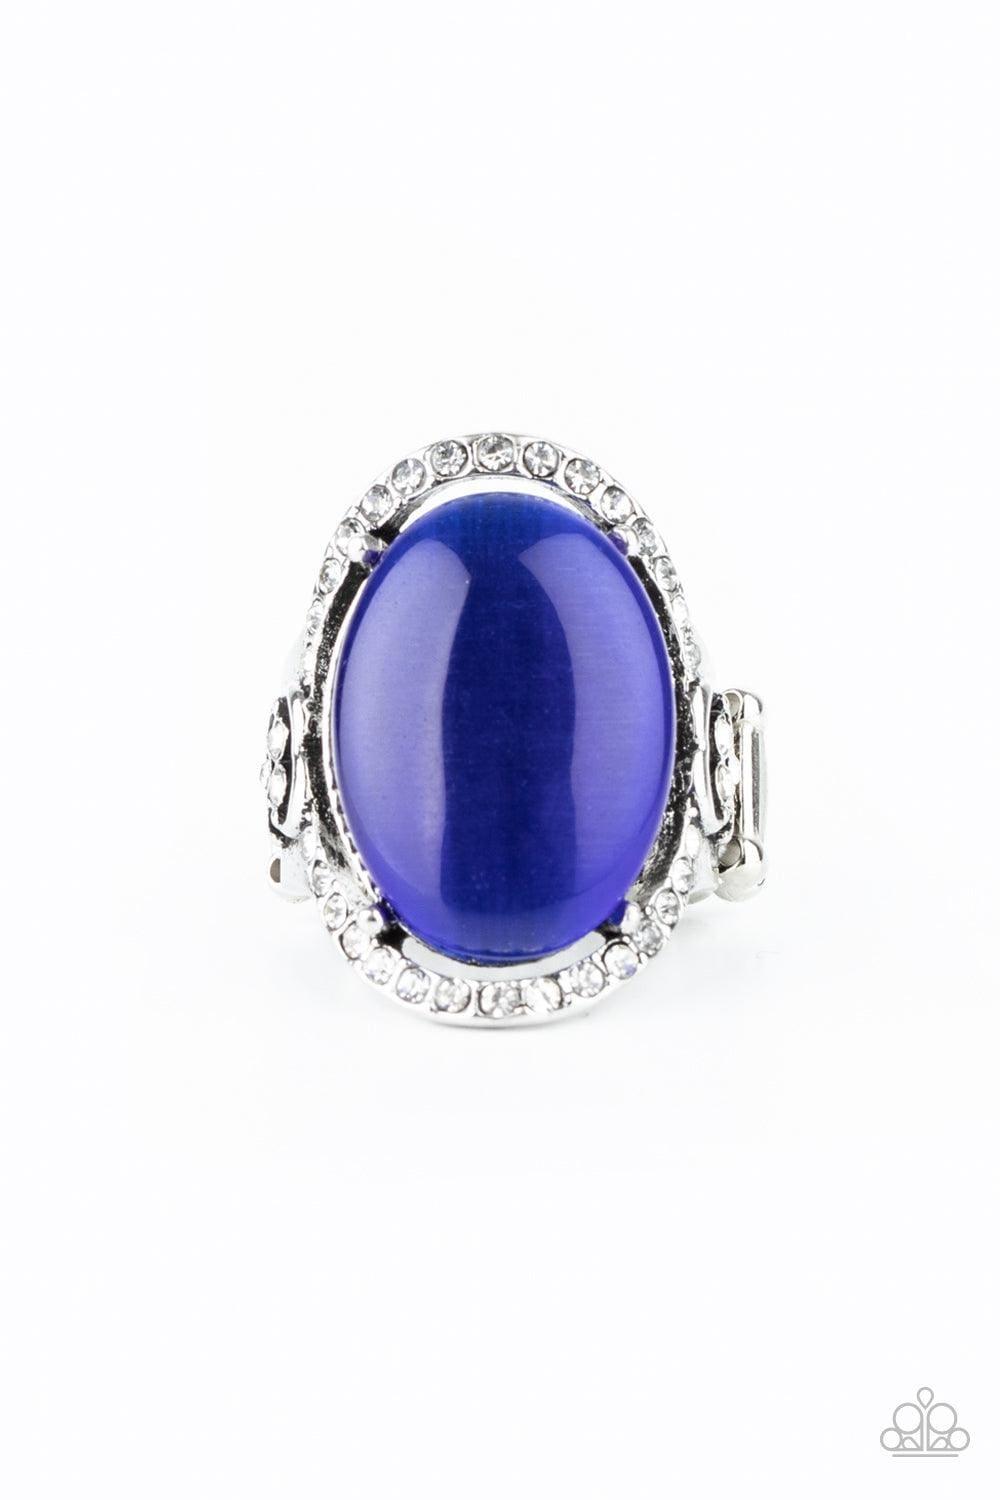 Paparazzi Accessories - Happily Ever Enchanted - Blue Ring - Bling by JessieK